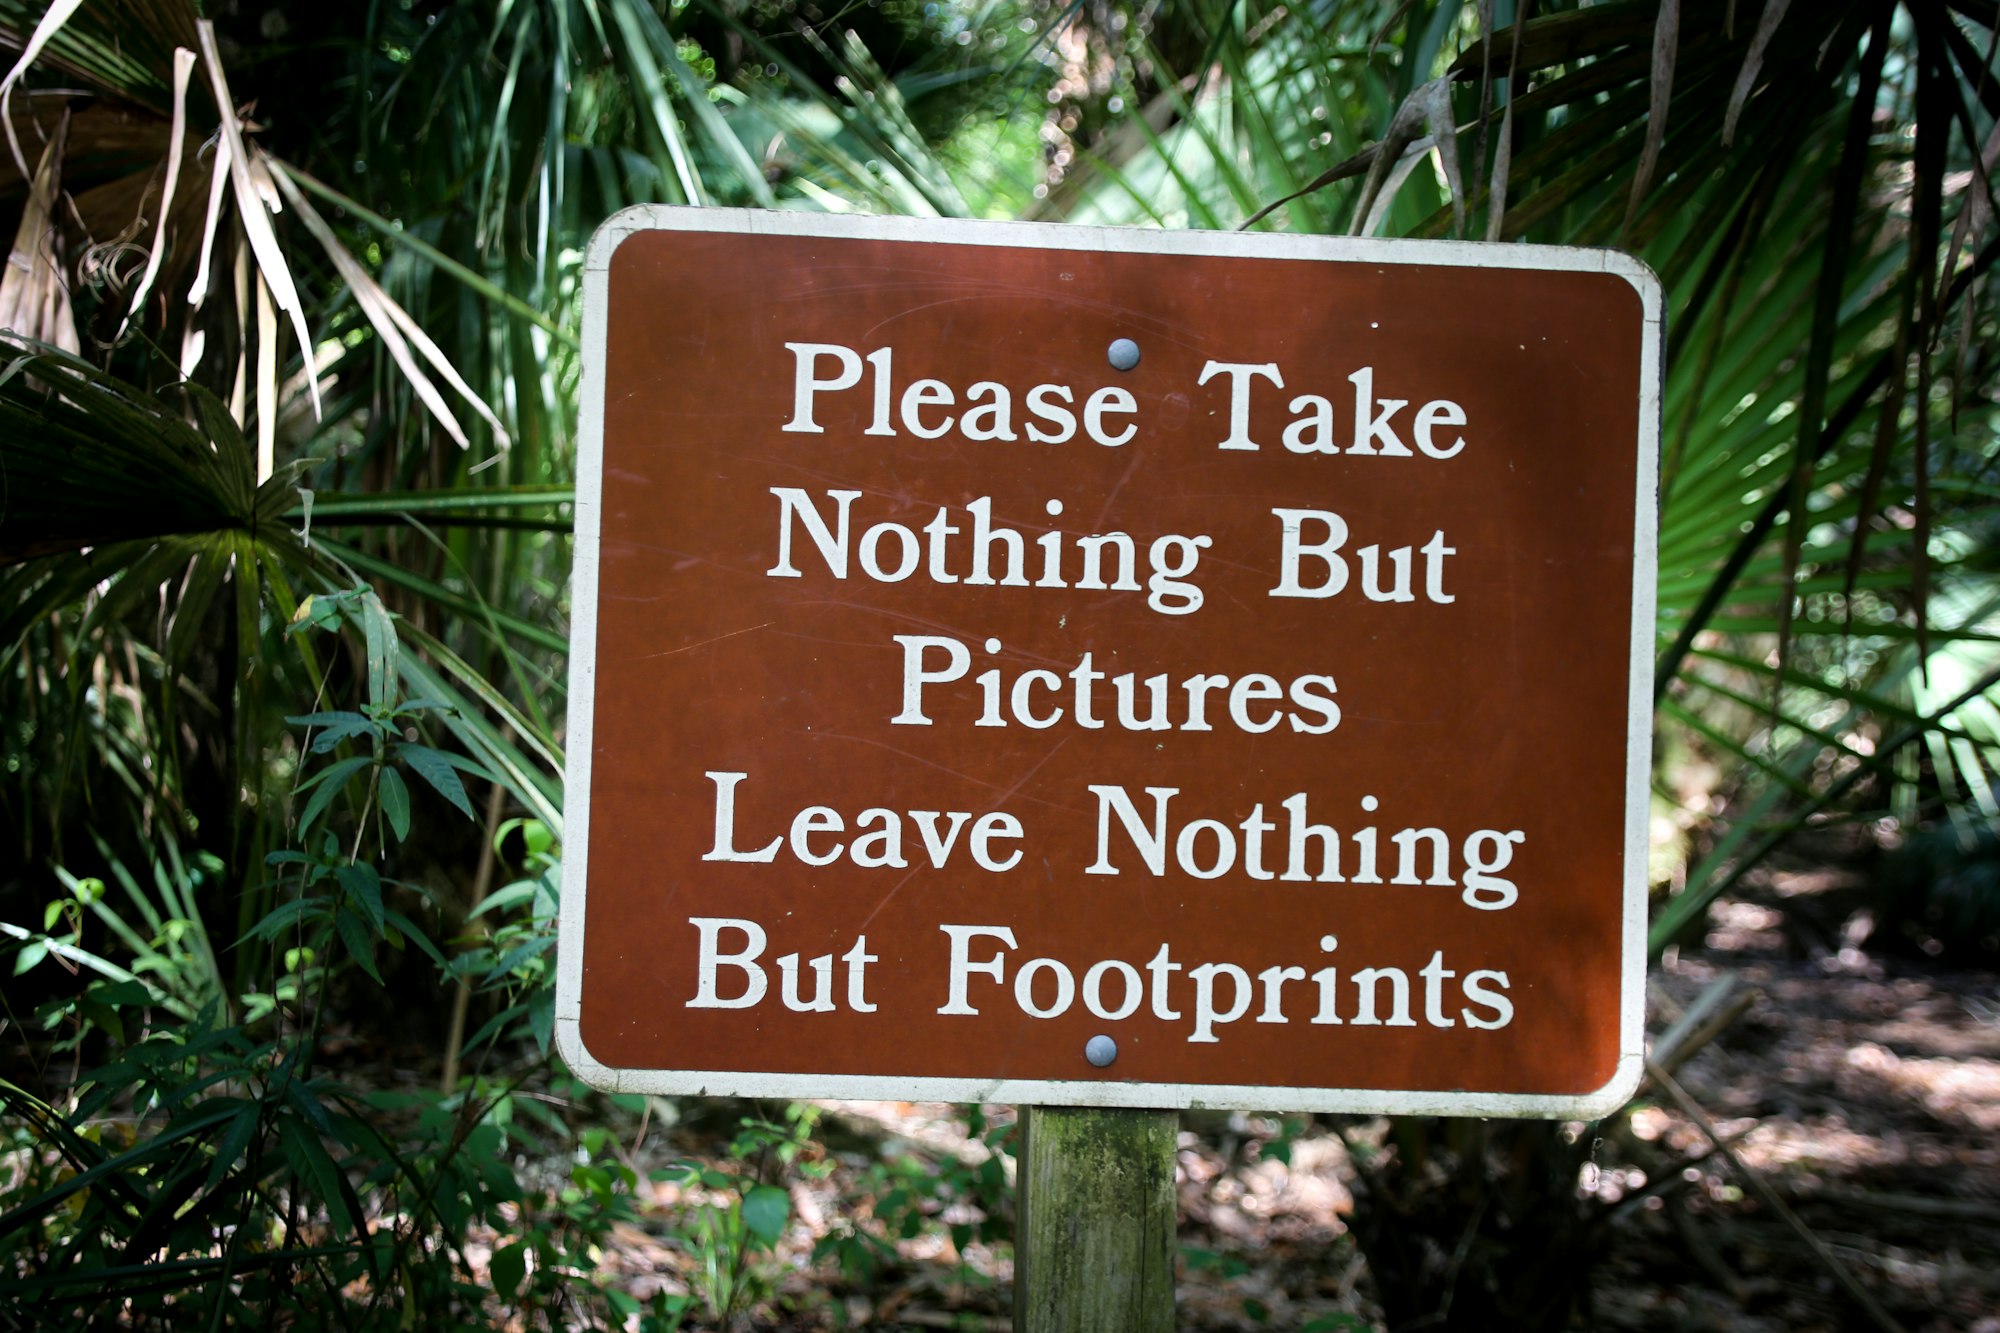 A "Leave No Trace" sign in a Florida state park says "Take nothing but pictures, leave nothing but footprints." This image first appeared on https://www.florida-guidebook.com
